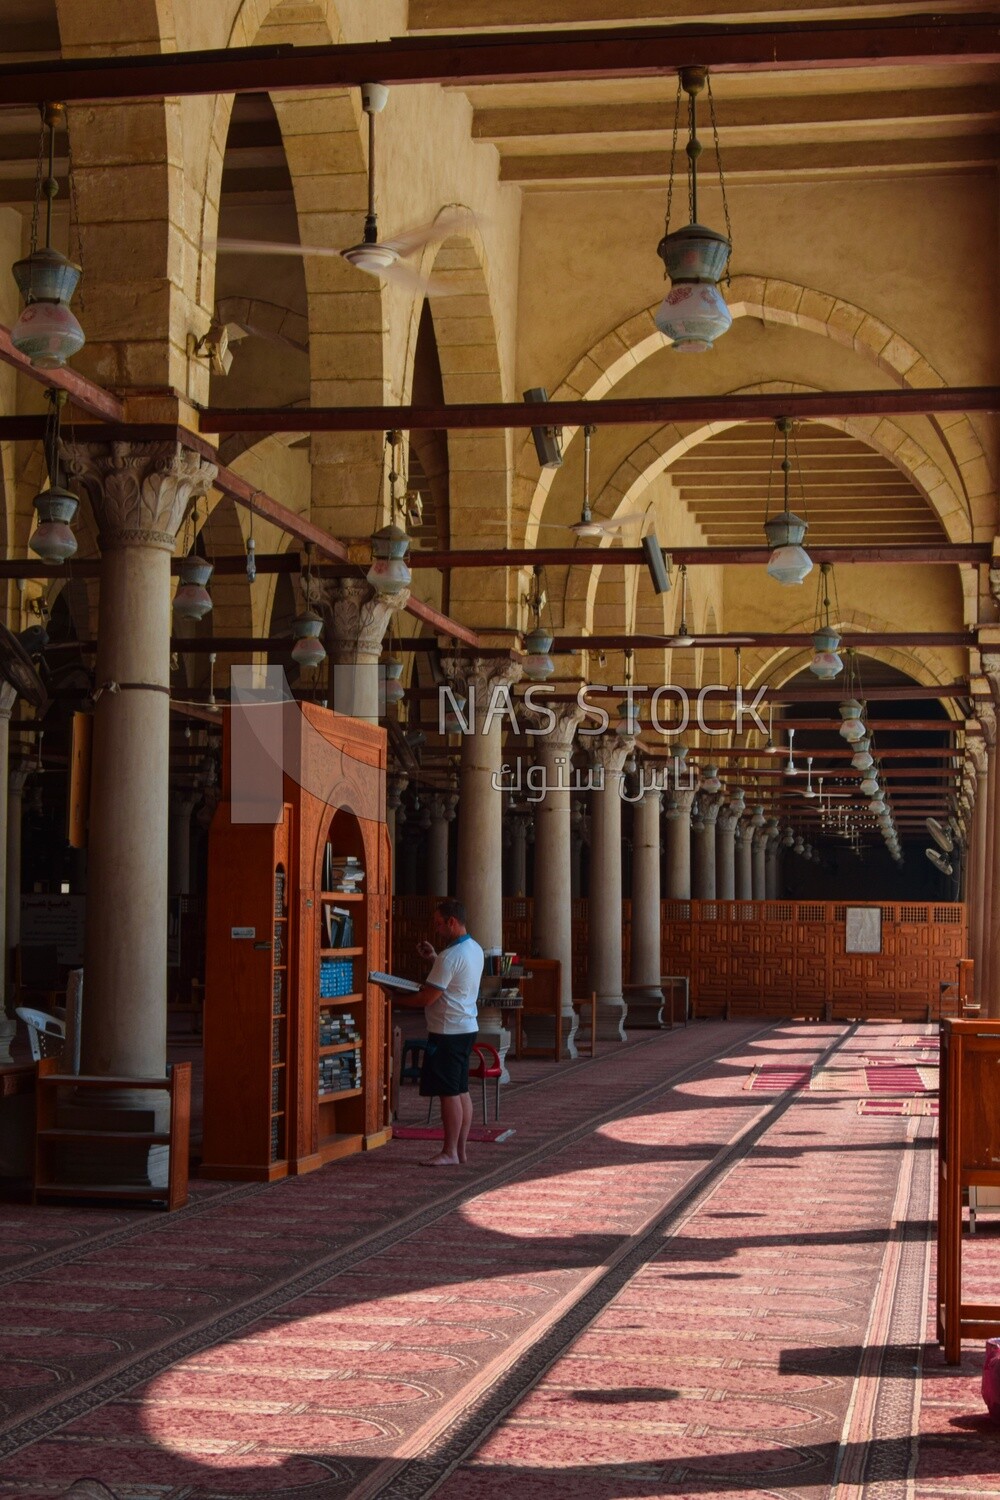 Arches Mosque of Amr ibn al-a'as in Cairo, Tourism in Egypt, Famous landmarks in Egypt